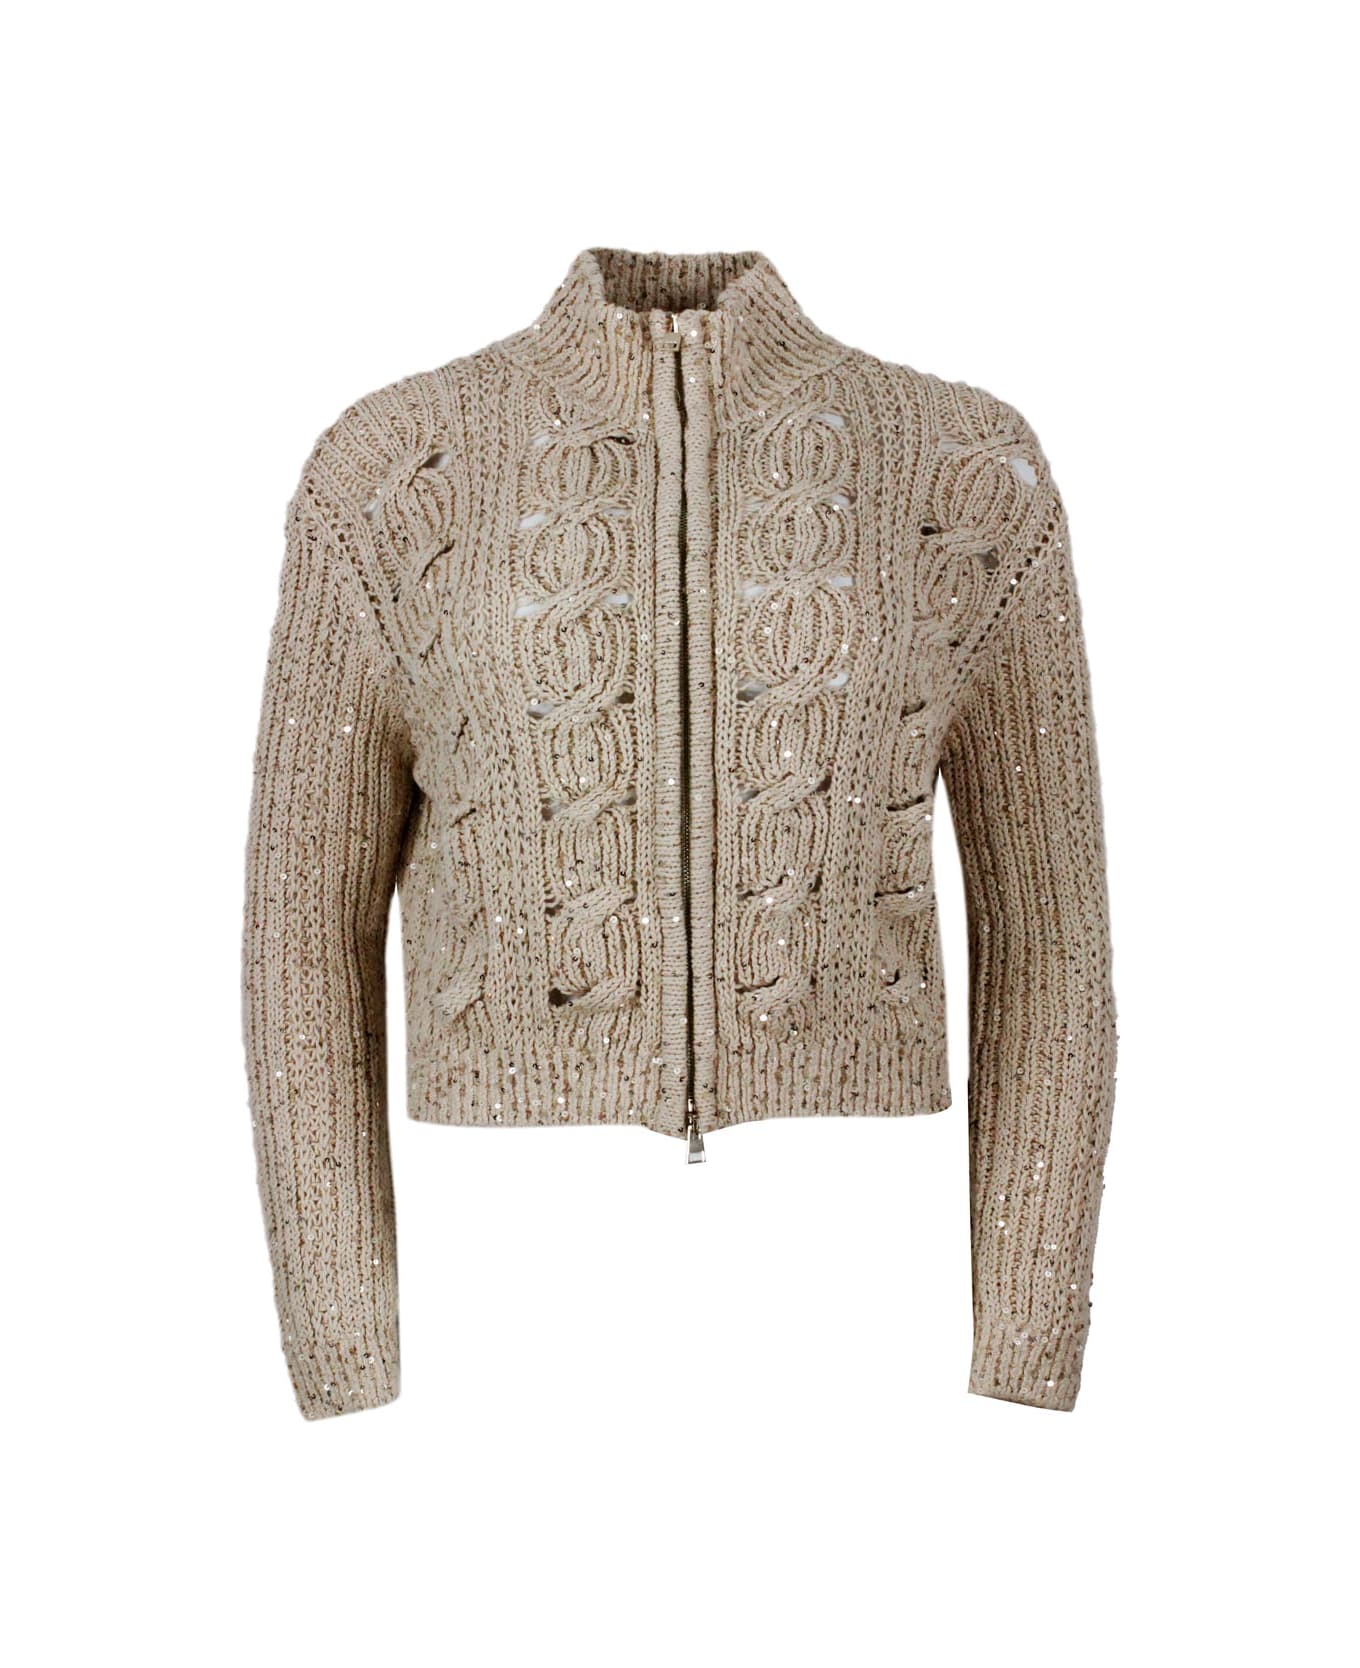 Lorena Antoniazzi Long-sleeved Full-zip Cardigan Sweater In Cotton Thread With Braided Work Embellished With Applied Microsequins - Gold